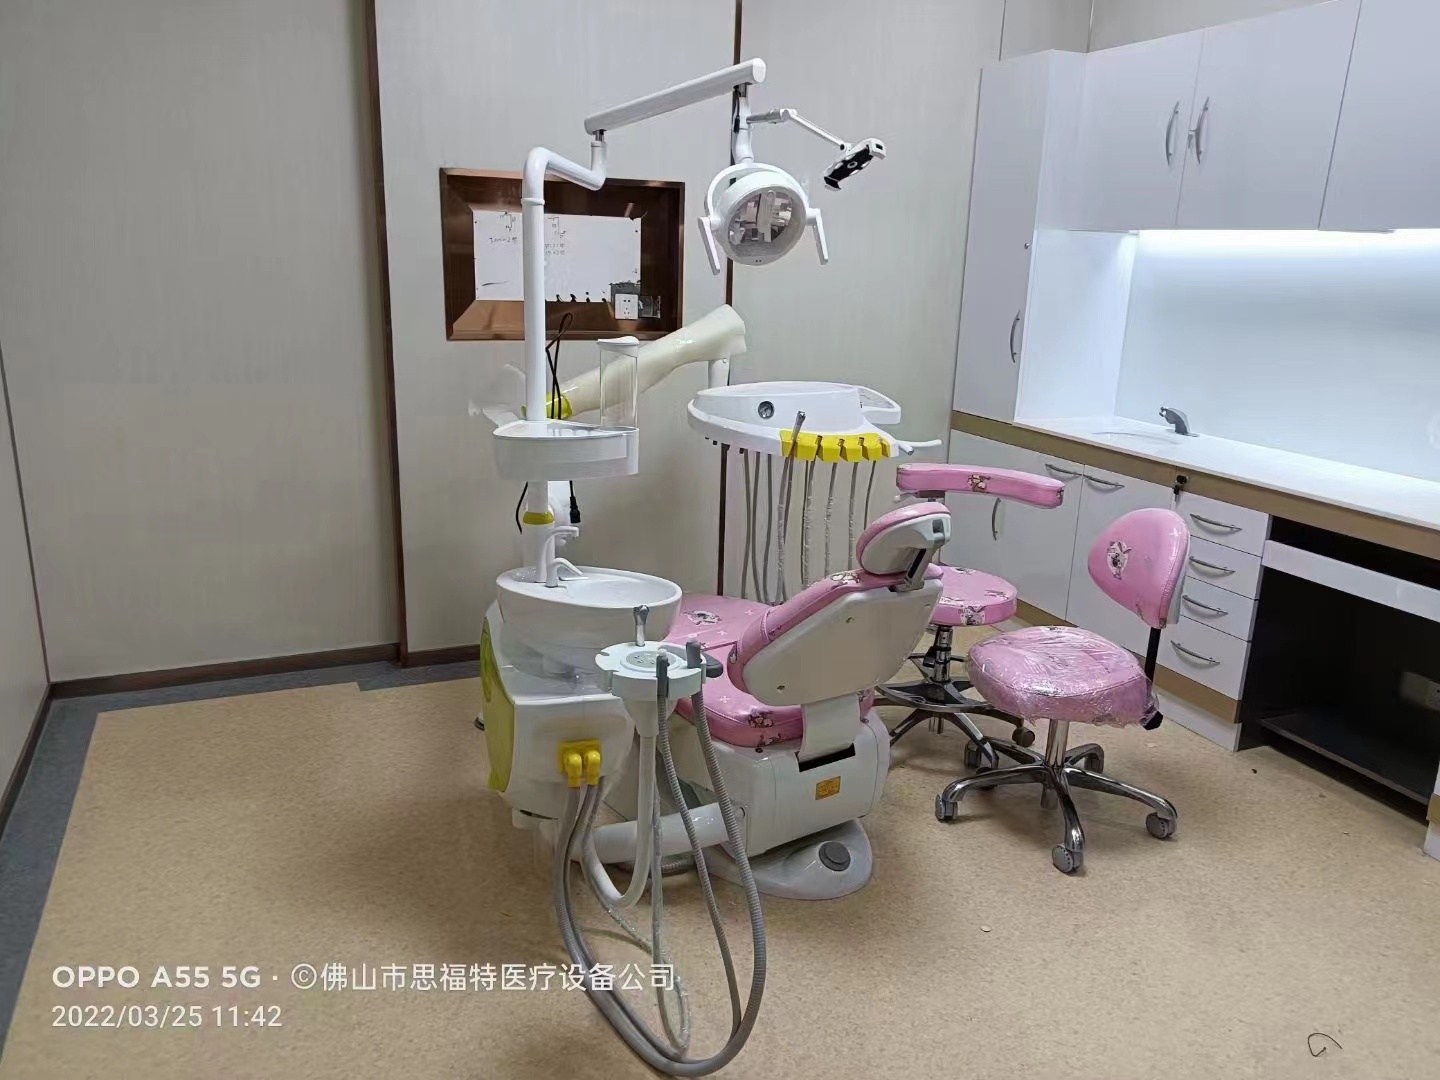 How does a dental chair work